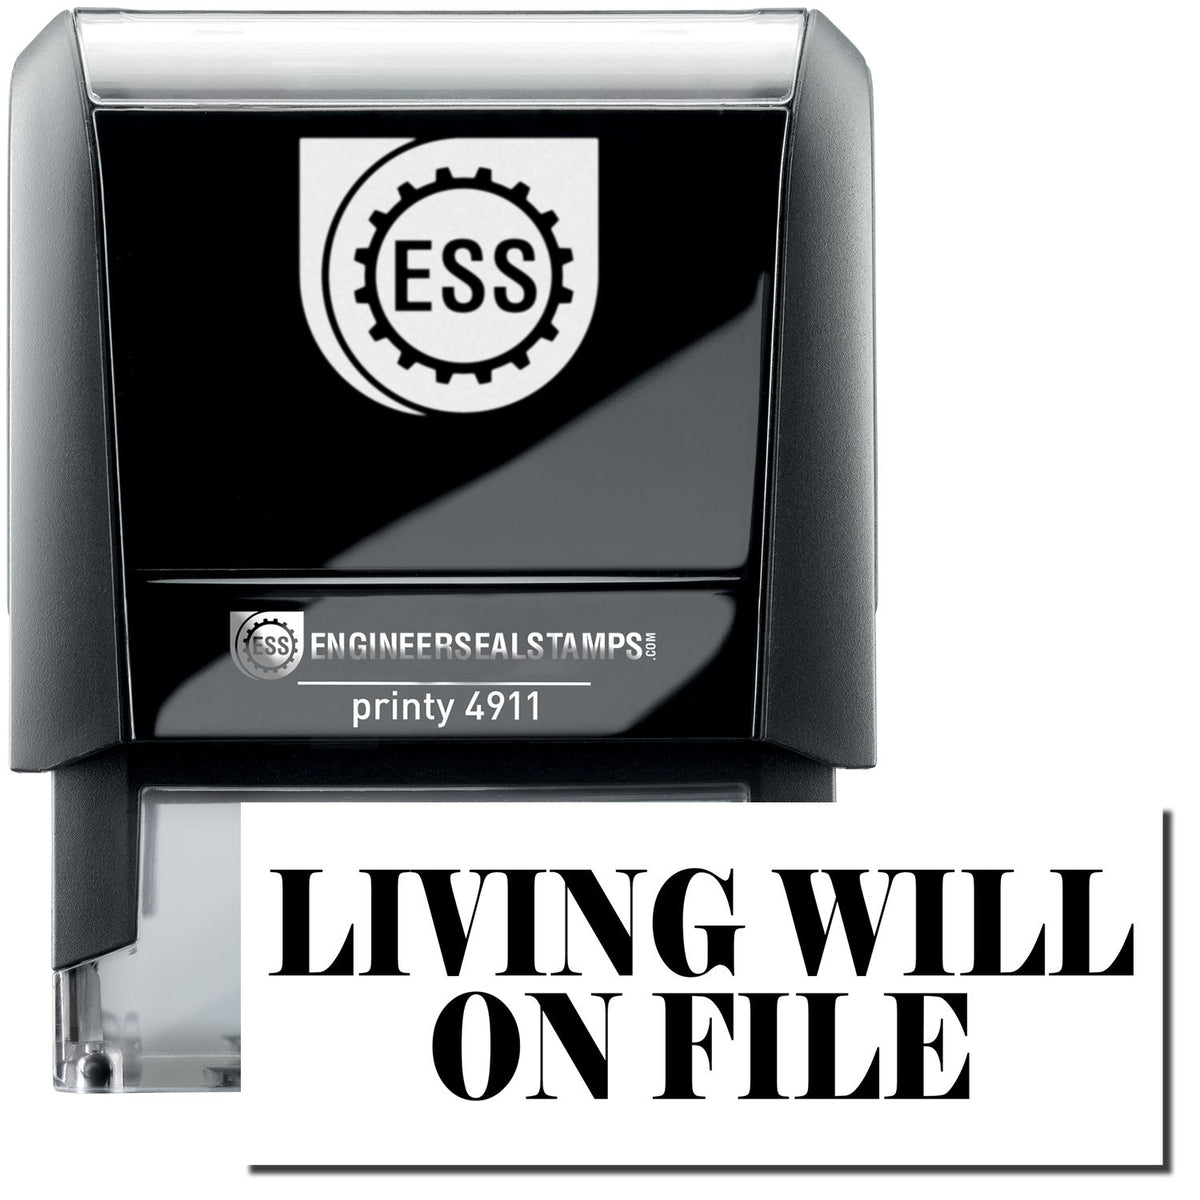 A self-inking stamp with a stamped image showing how the text &quot;LIVING WILL ON FILE&quot; is displayed after stamping.